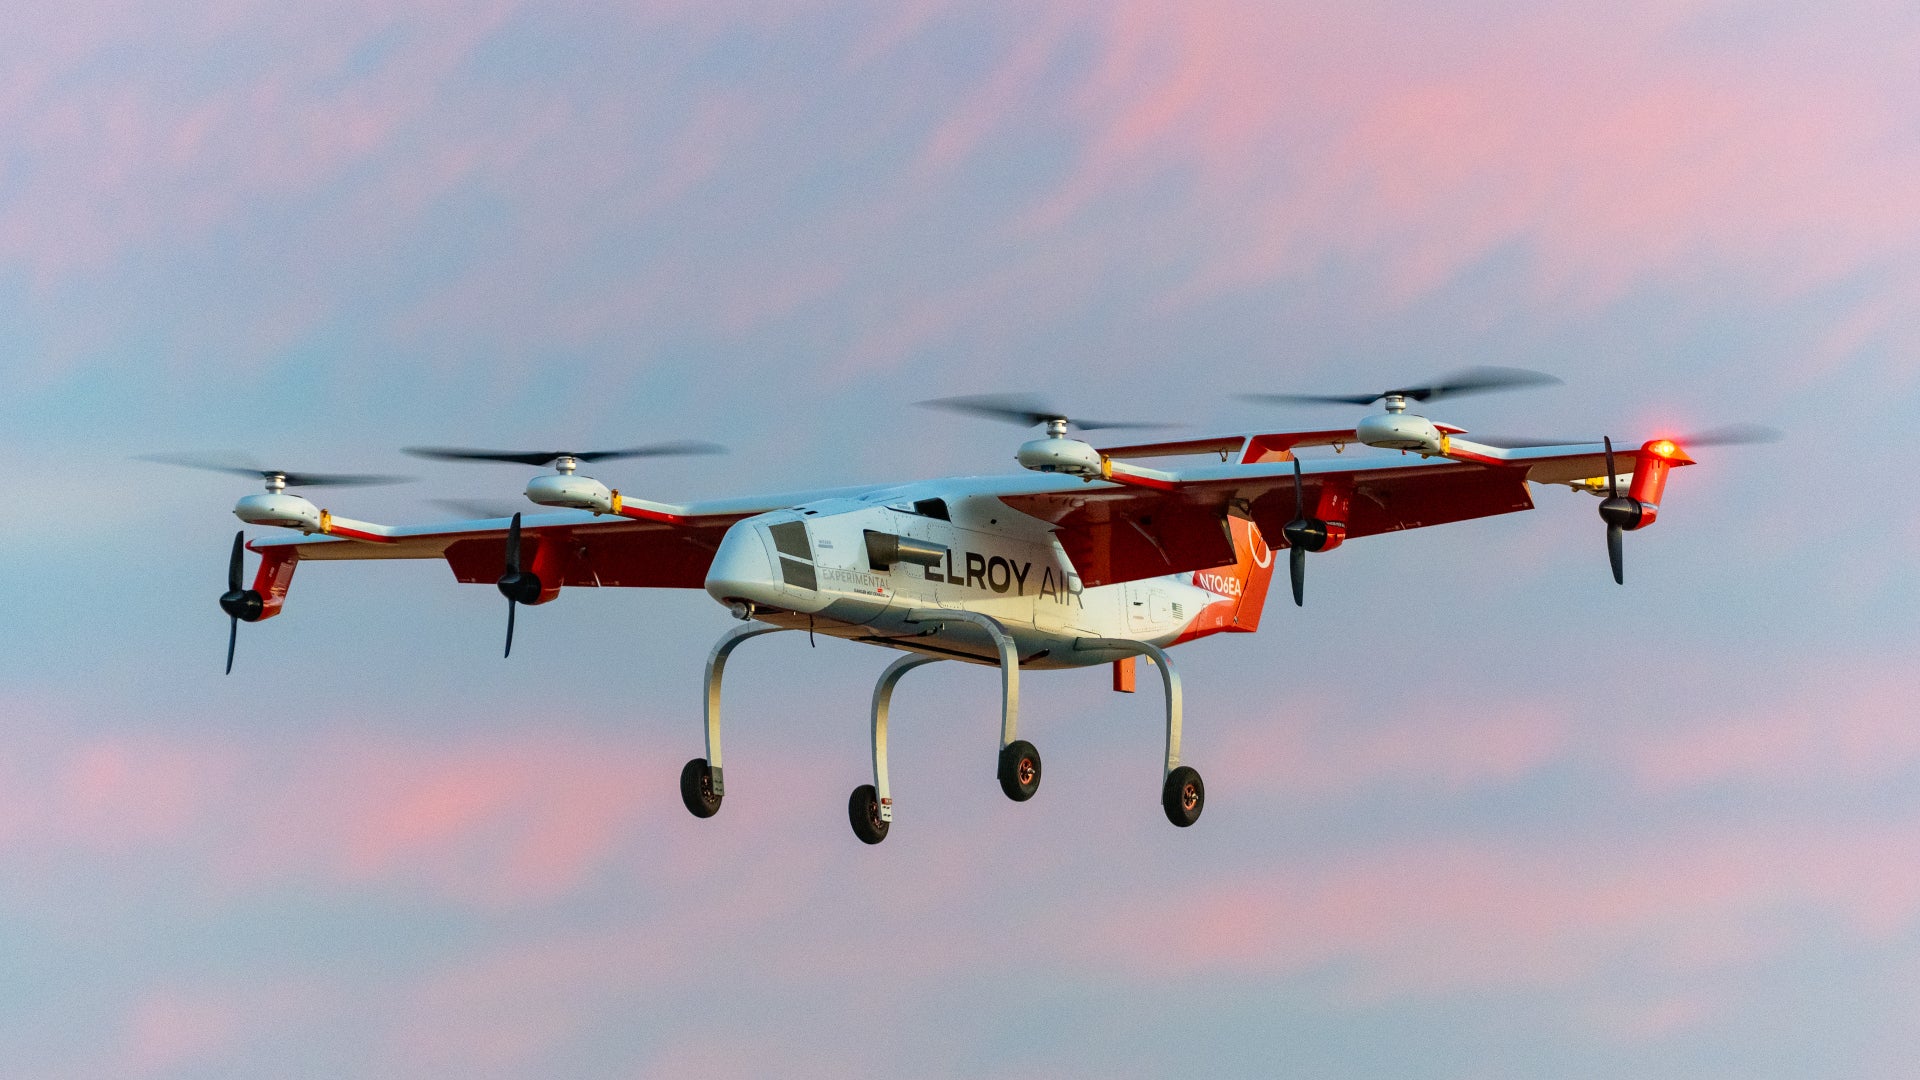 Elroy Air Conducts Groundbreaking Flight of Hybrid-Electric Cargo Drone